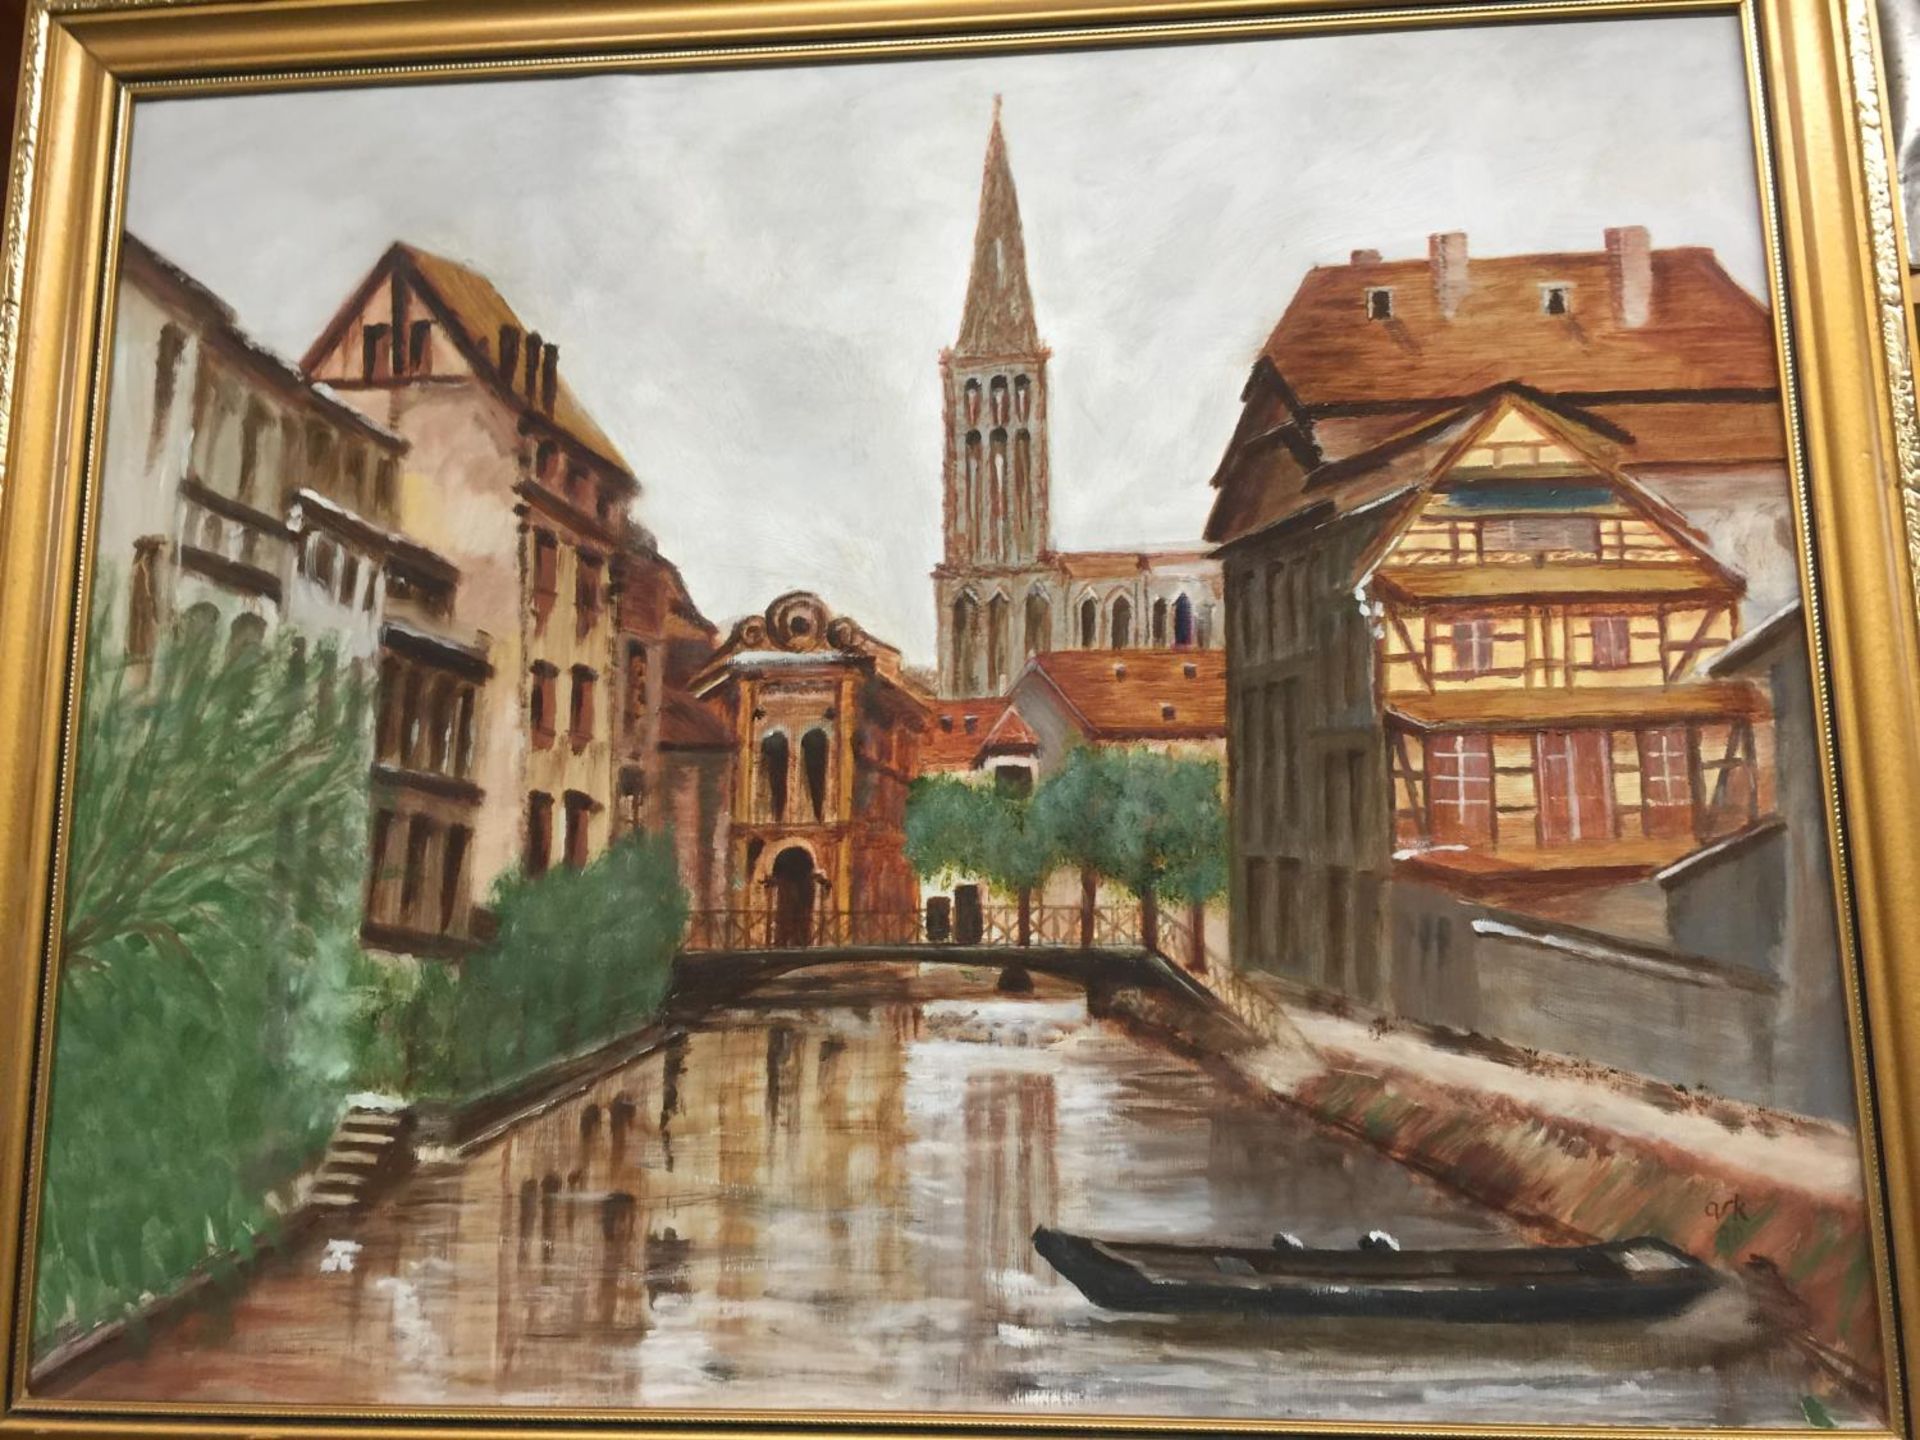 AN OIL ON BOARD OF A CANAL SCENE PLUS A PRINT OF A BOAT IN A HARBOUR - Image 2 of 2